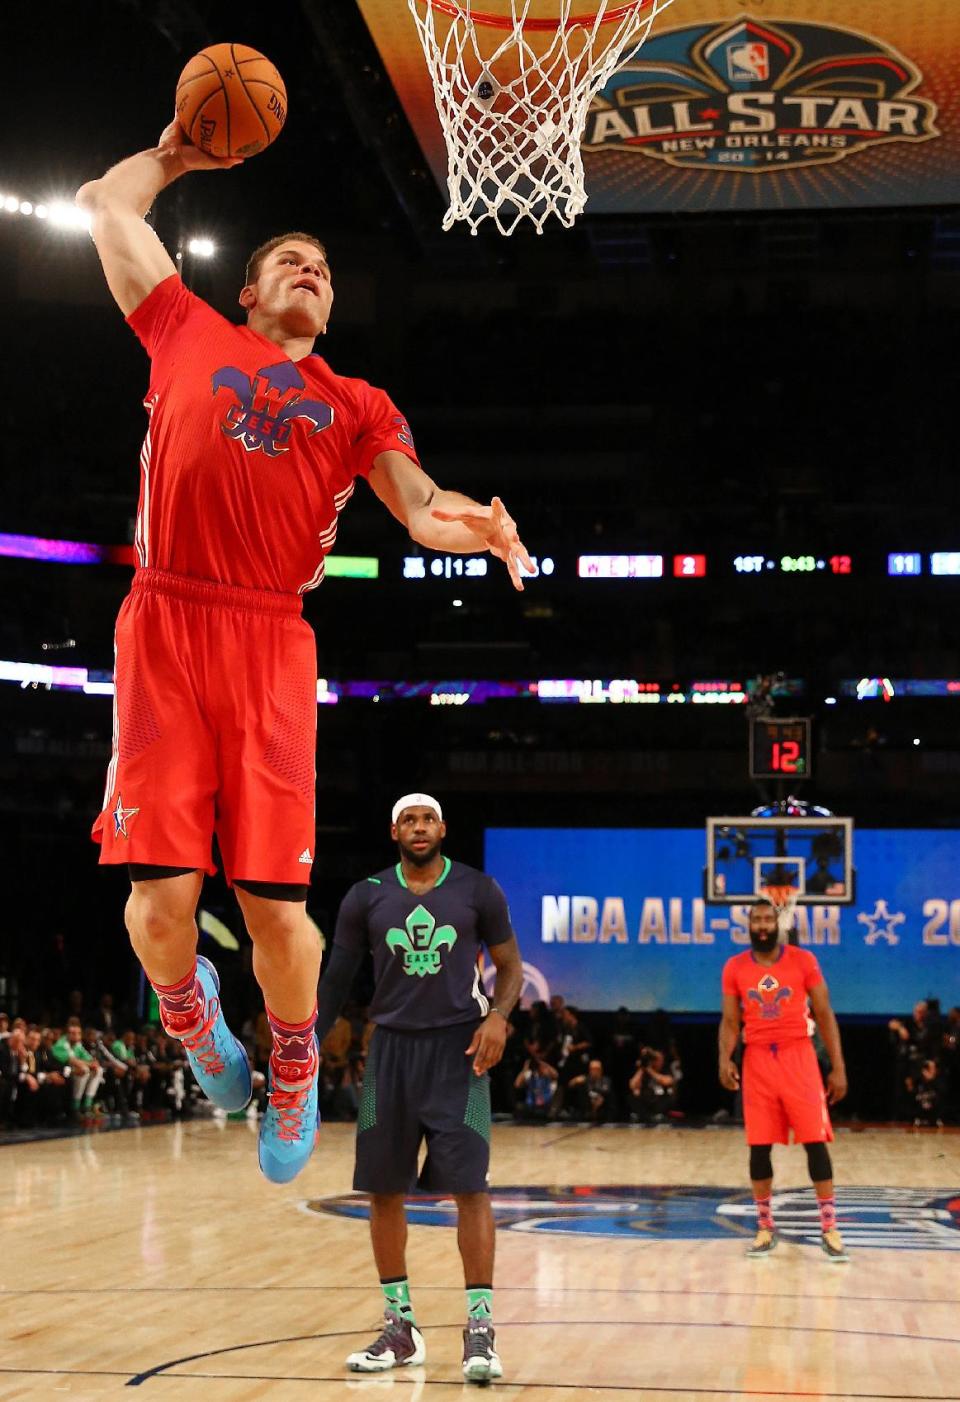 West Team's Blake Griffin, of the Los Angeles Clippers (32) heads to the hoop as East Team's LeBron James, of the Miami Heat (6) looks on during the NBA All Star basketball game, Sunday, Feb. 16, 2014, in New Orleans. (AP Photo/Christian Petersen, Pool)